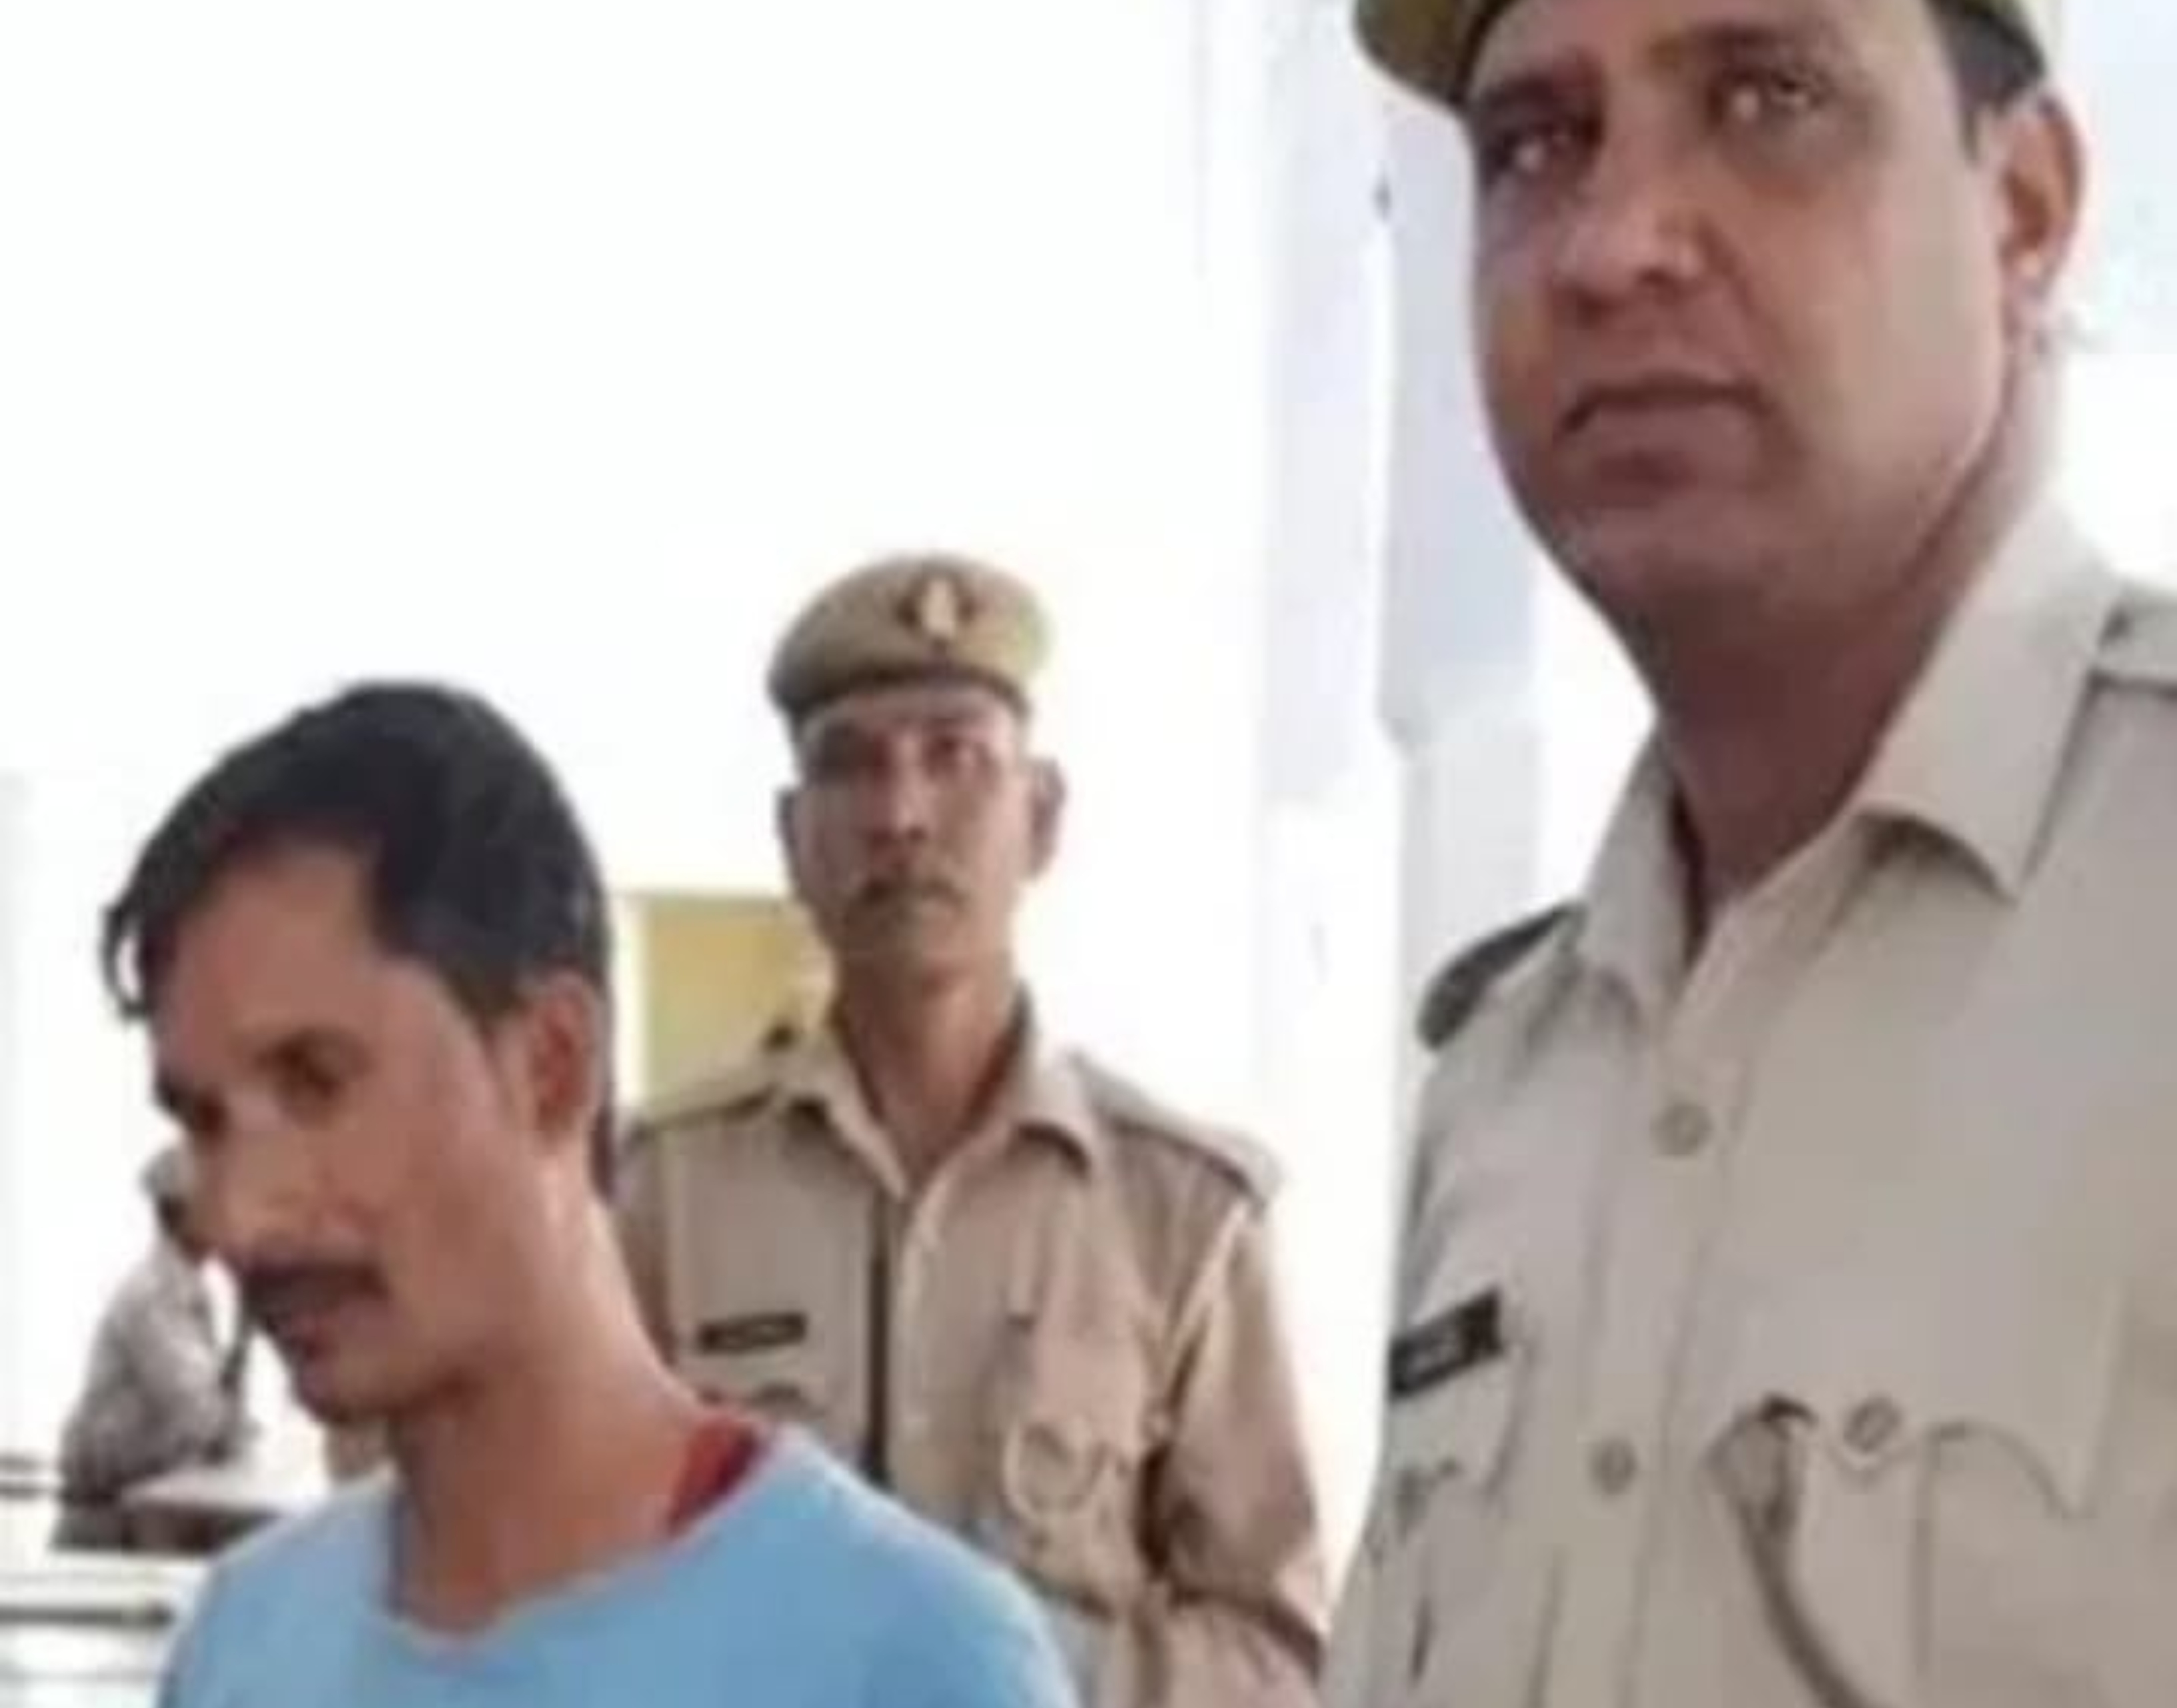 man trying to molest female patient admitted in district hospital Arrested